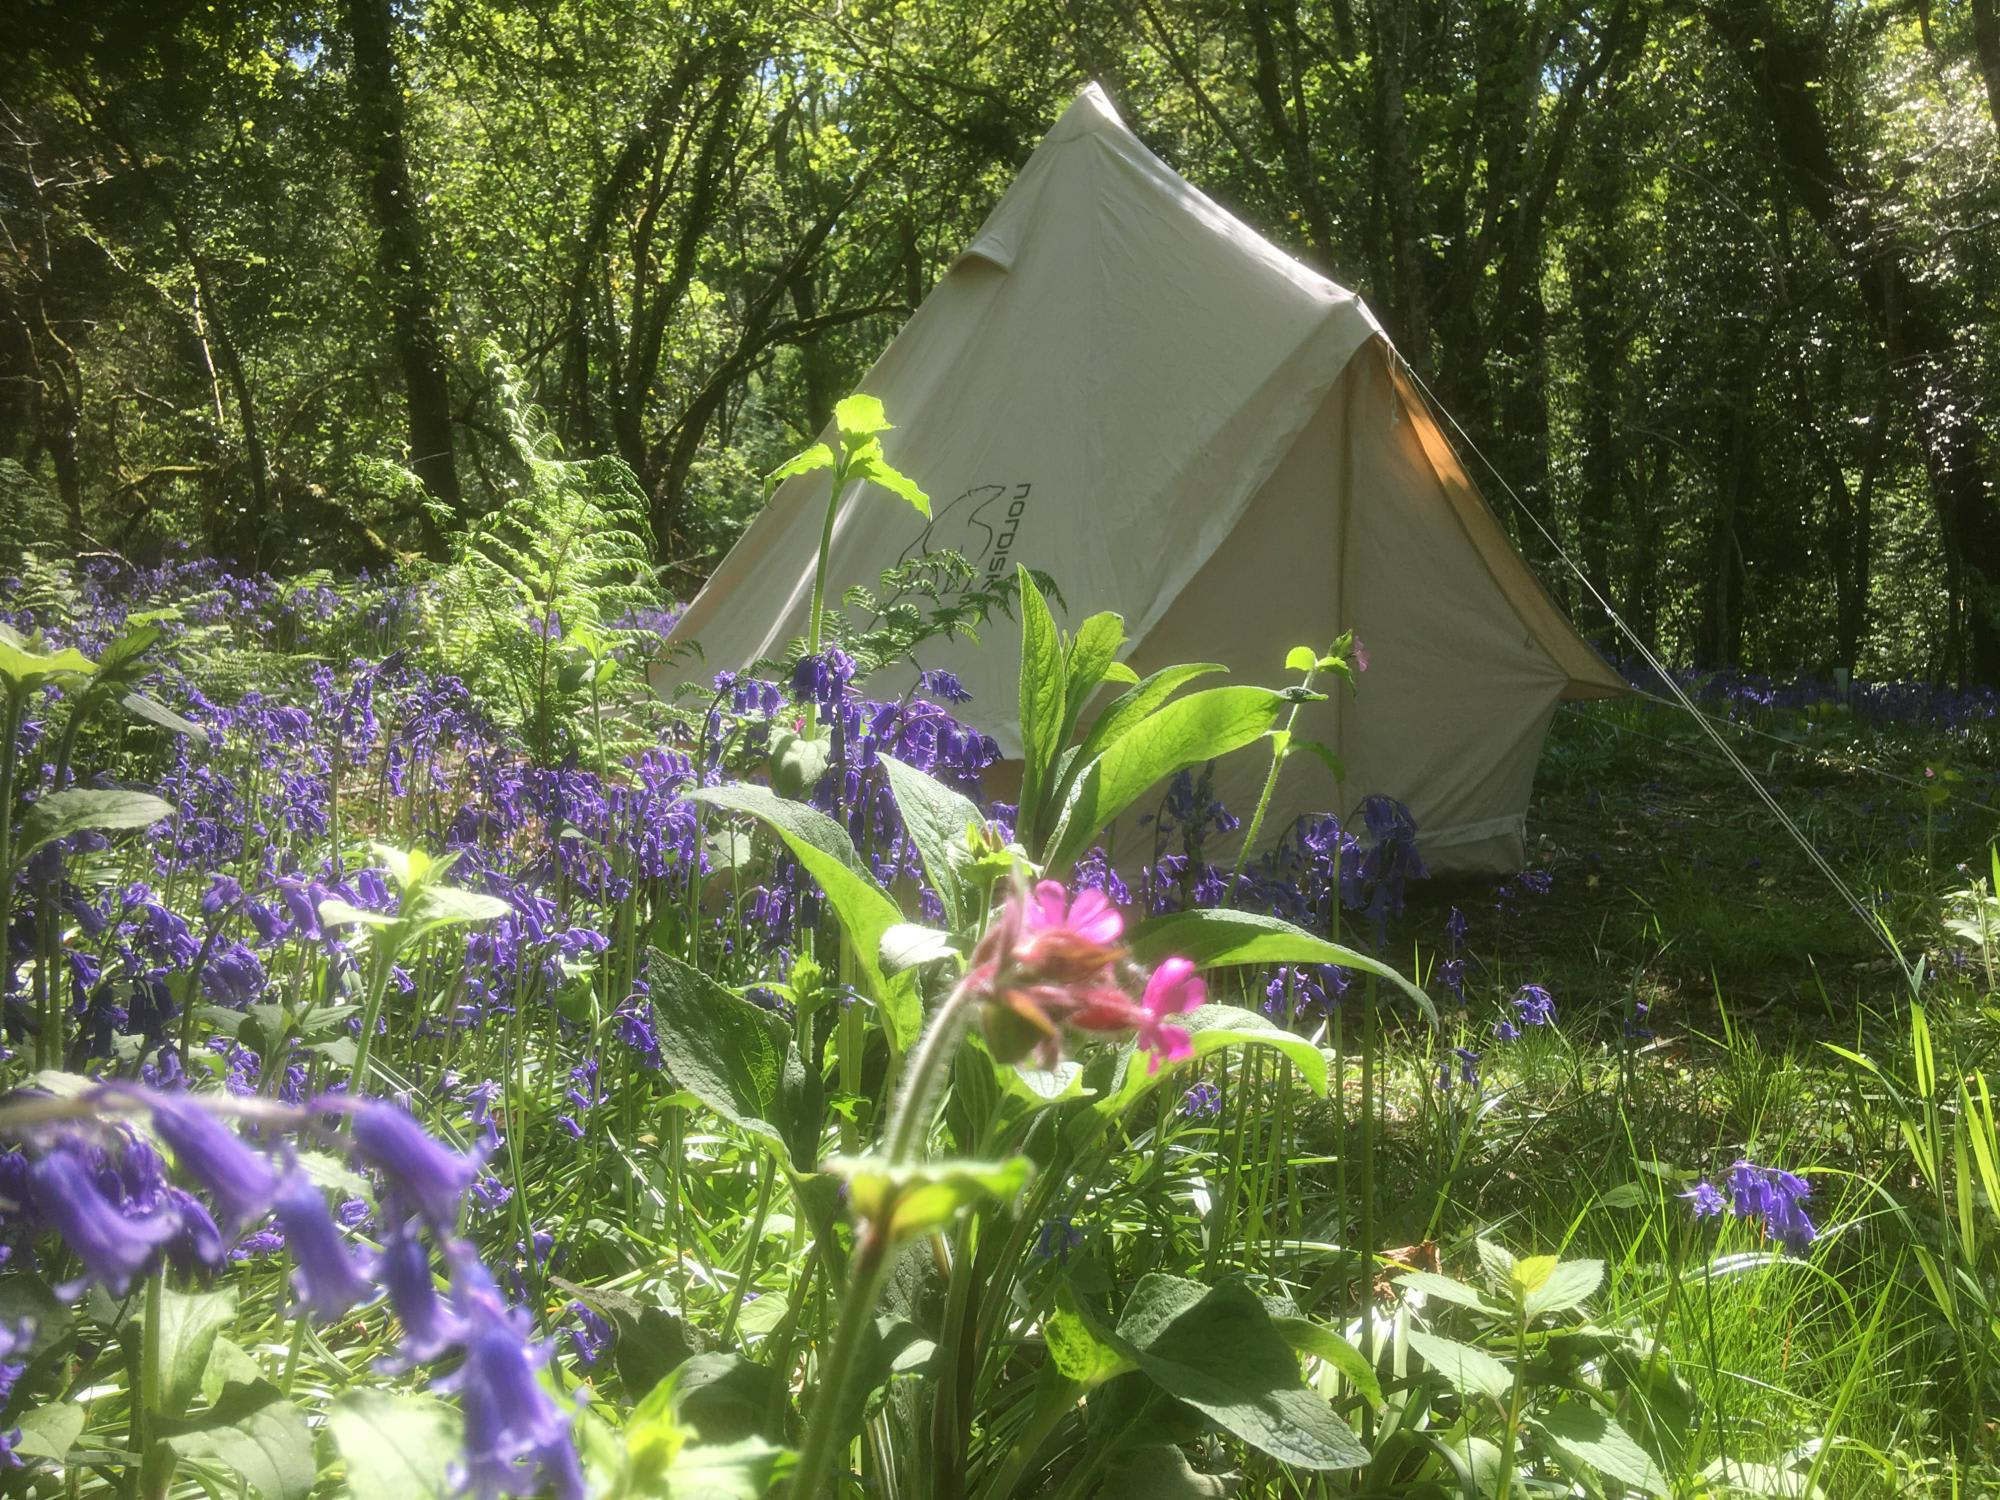 A tent pitch among the trees at Cilrath Wood Camping in Pembrokeshire.